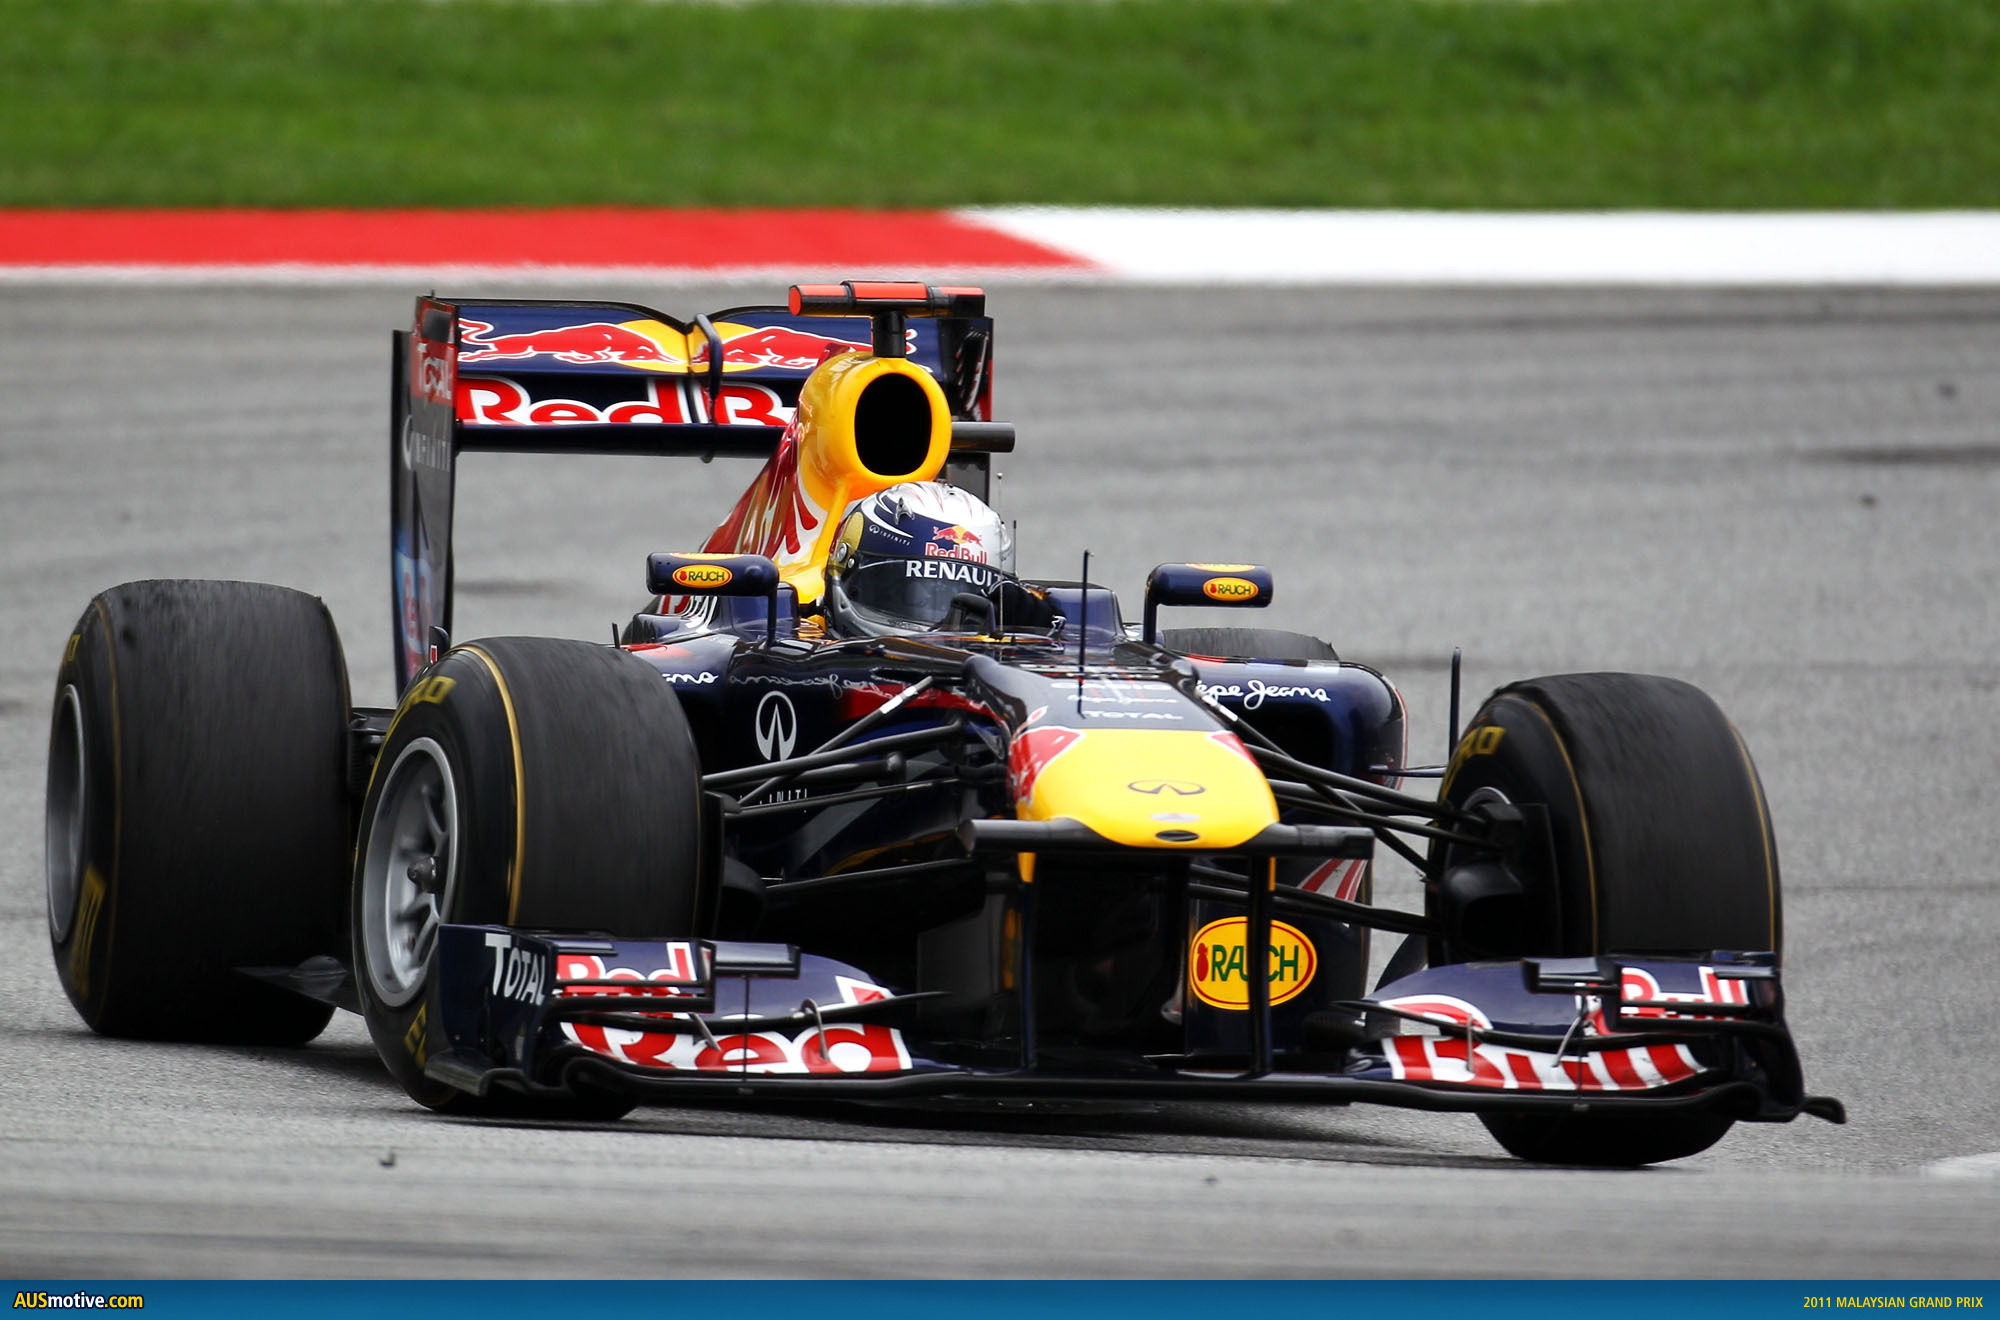 2011 Malaysian Grand Prix in pictures – AUSmotive.com